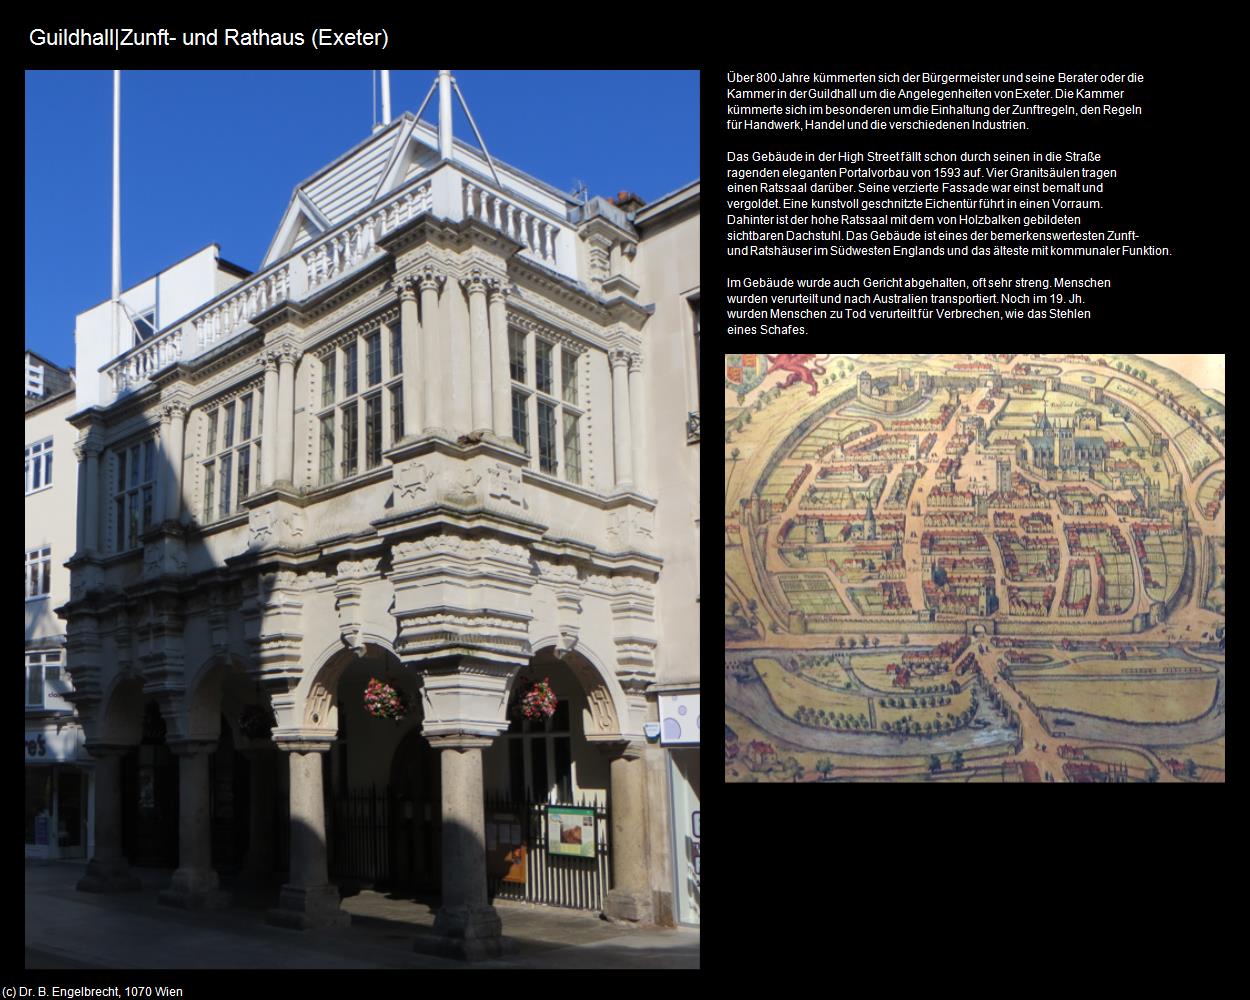 Guildhall (Exeter, England) in Kulturatlas-ENGLAND und WALES